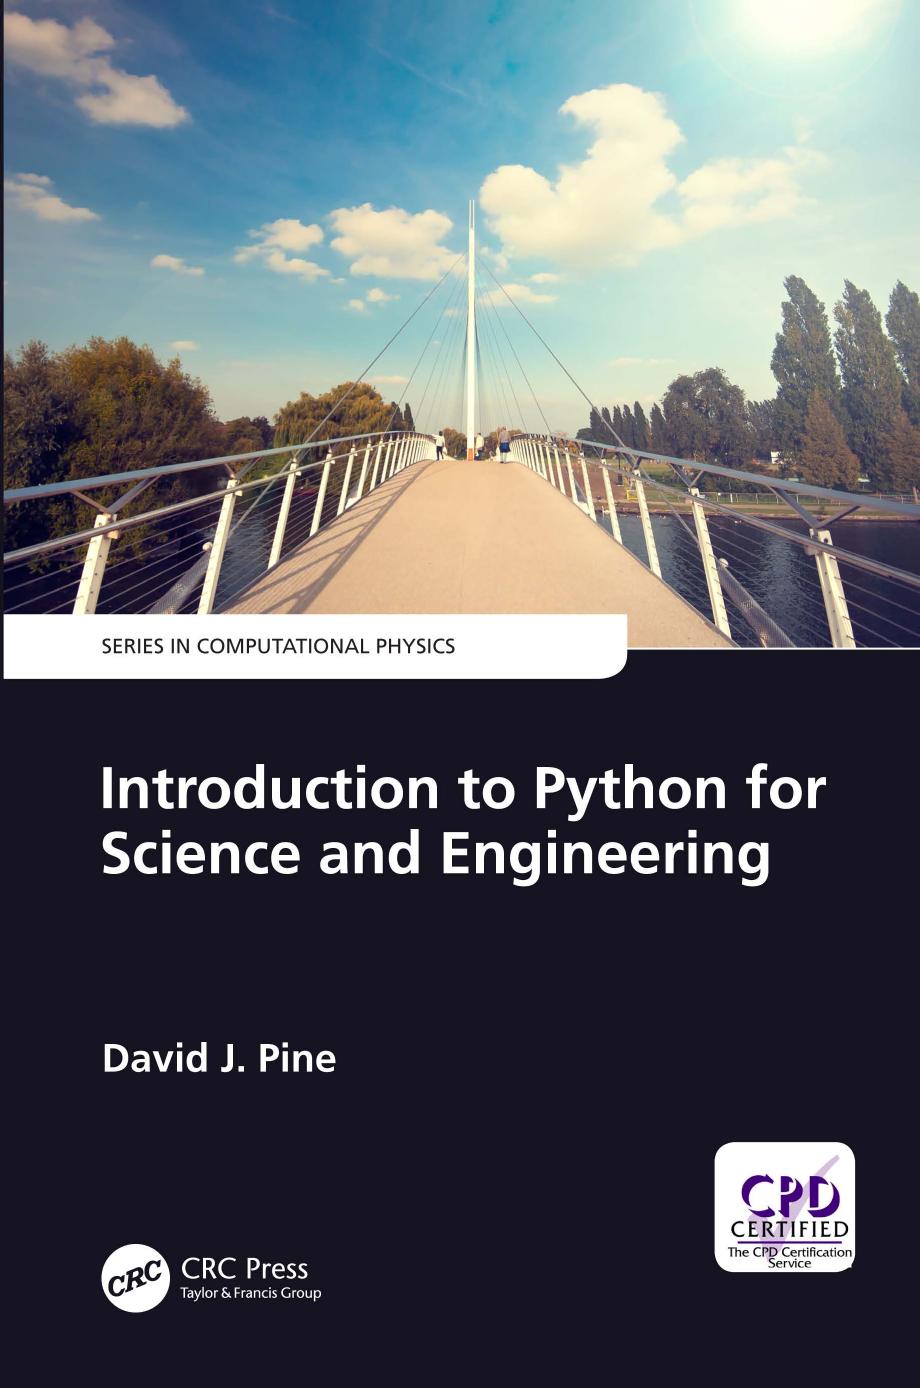 Introduction to Python for Science and Engineering 2019